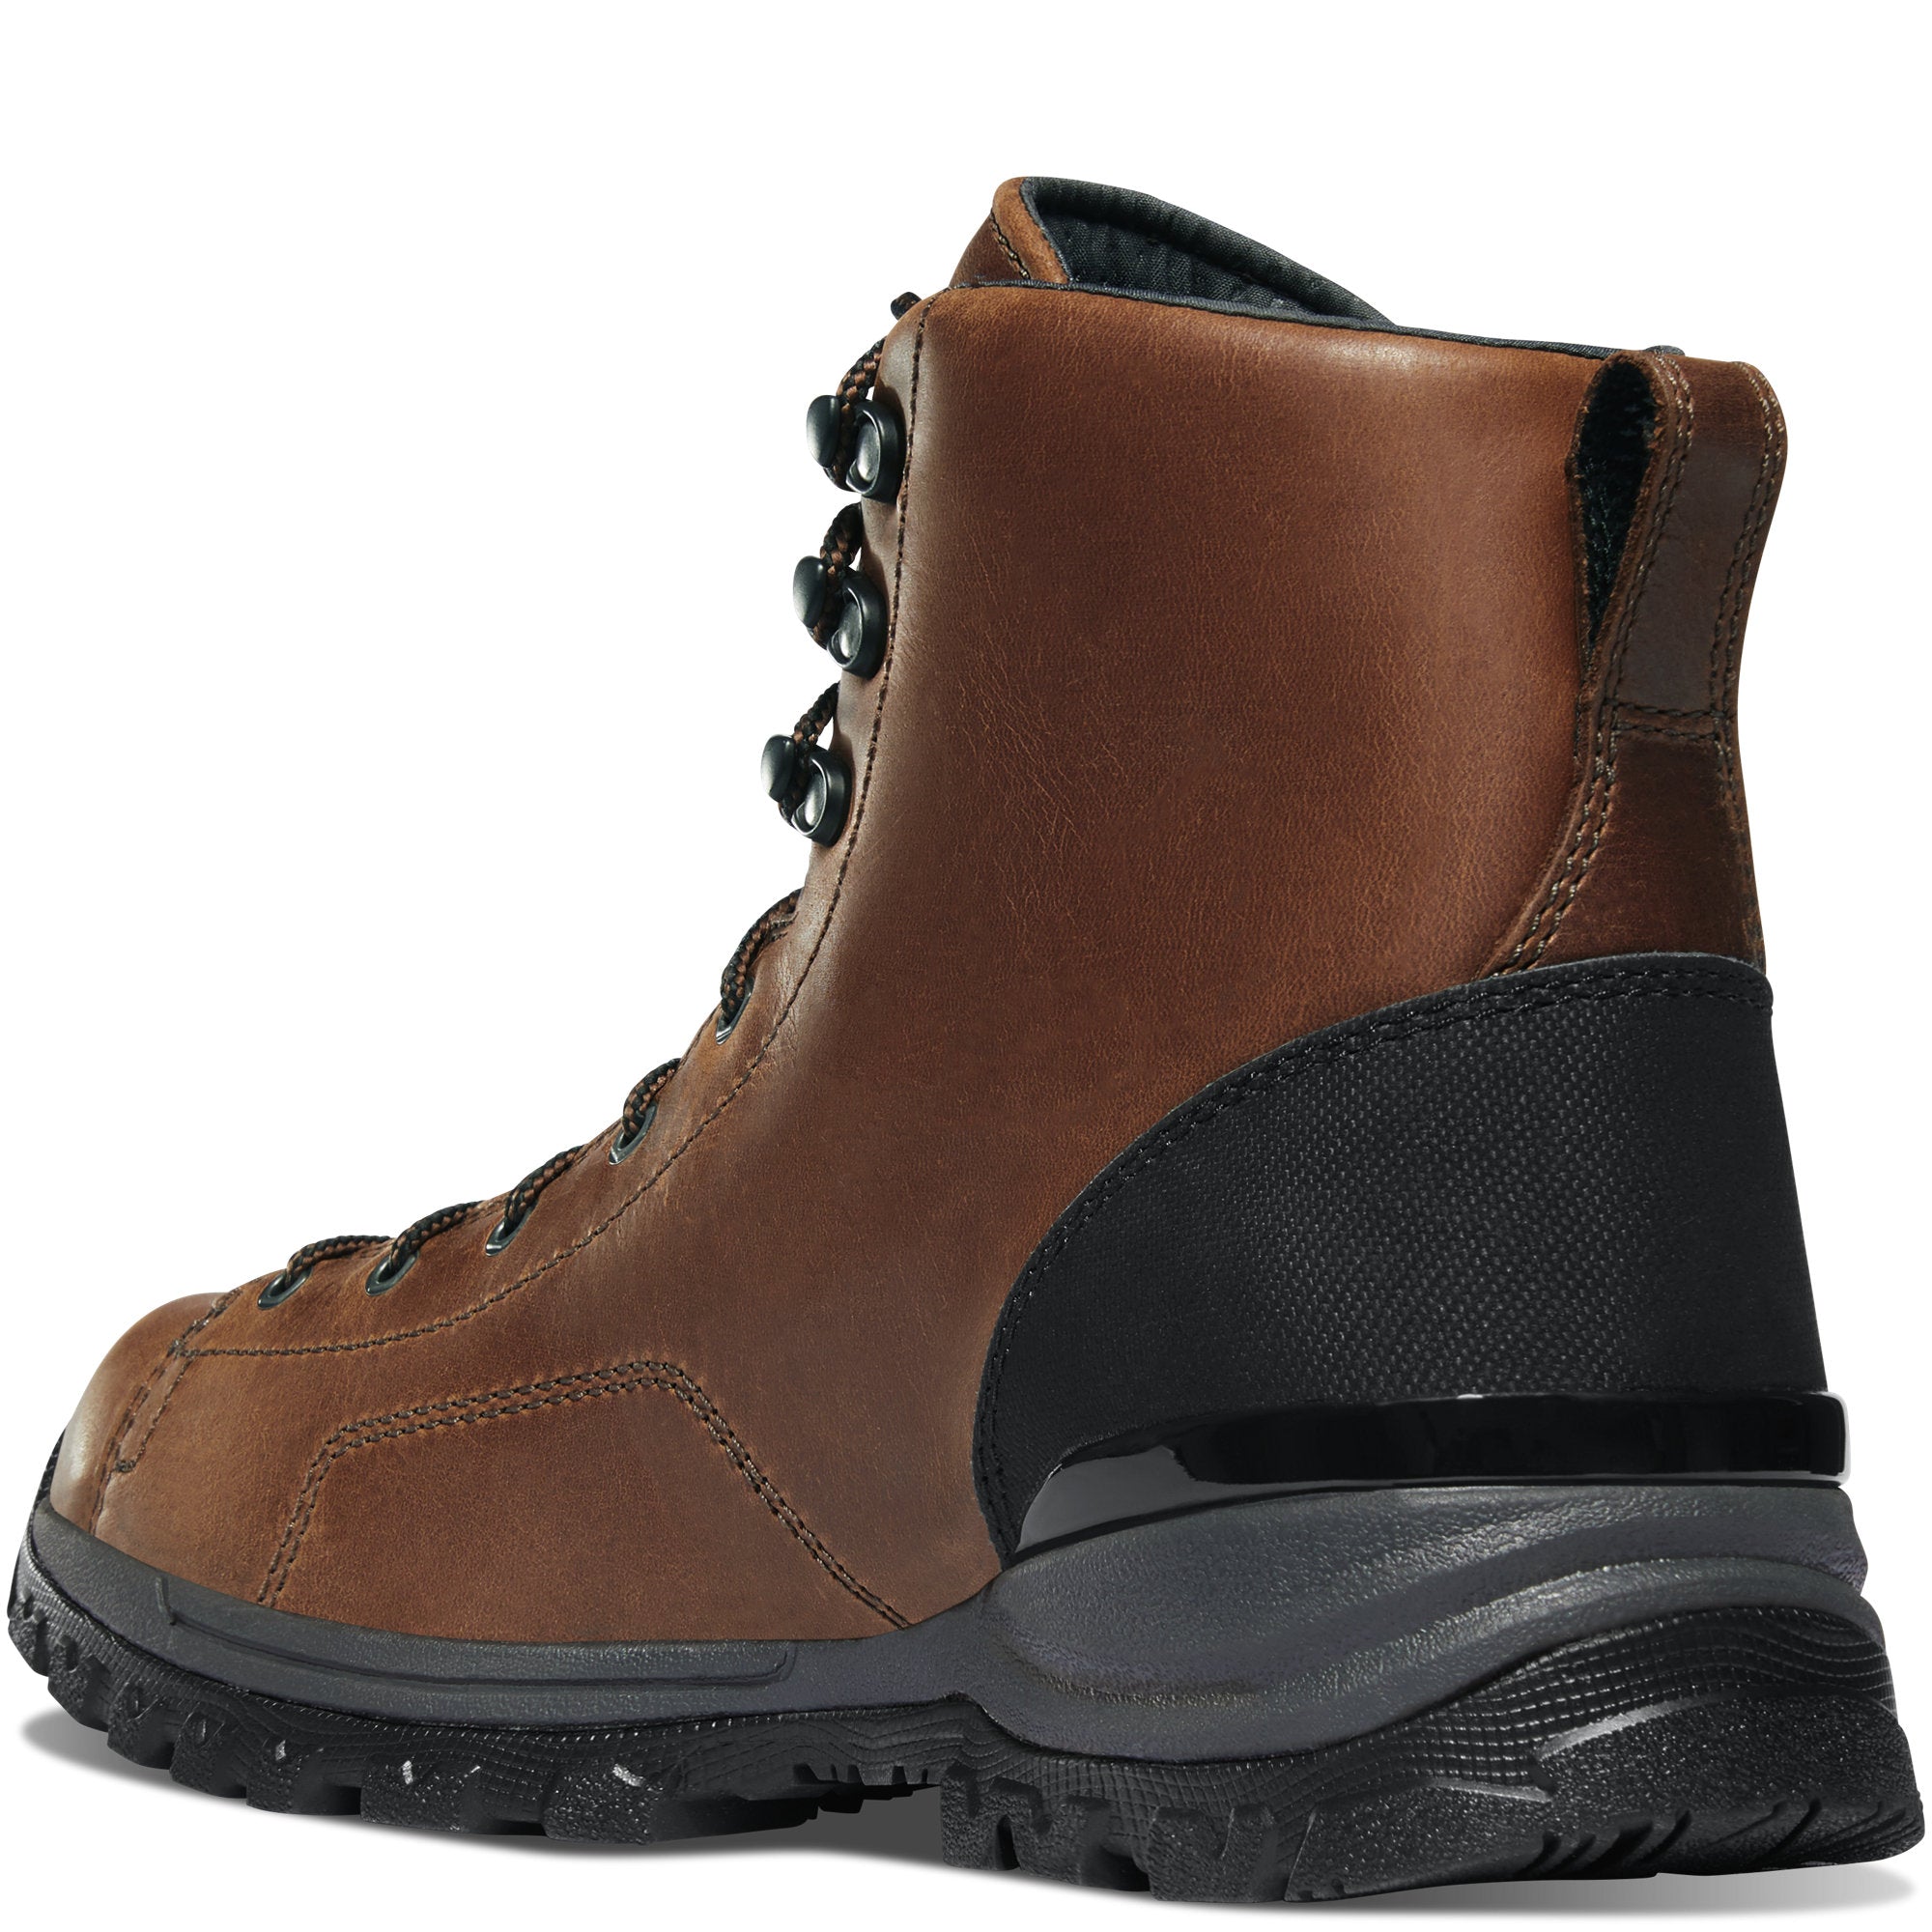 Danner Stronghold (Composite Toe)